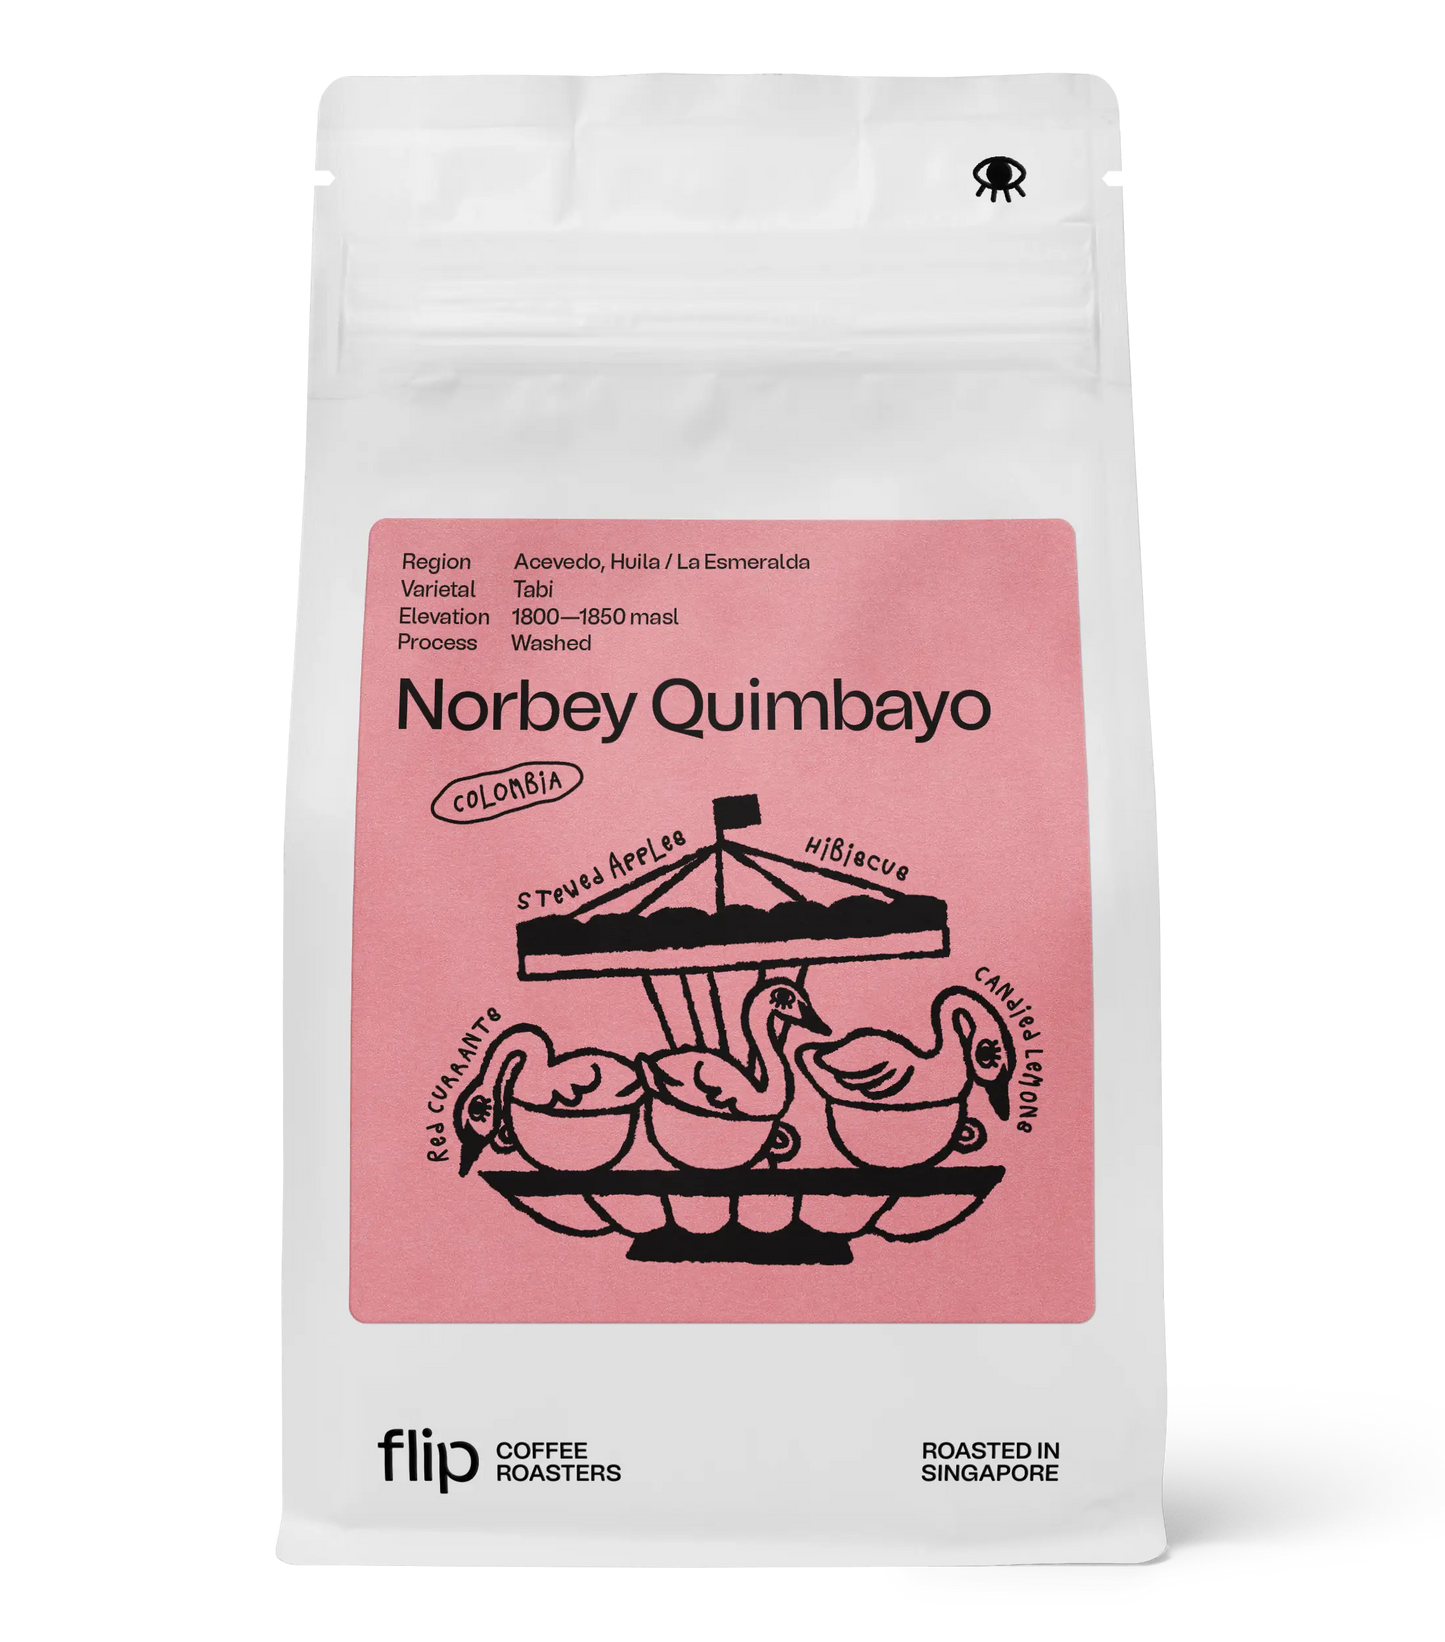 Colombia Norbey Quimbayo